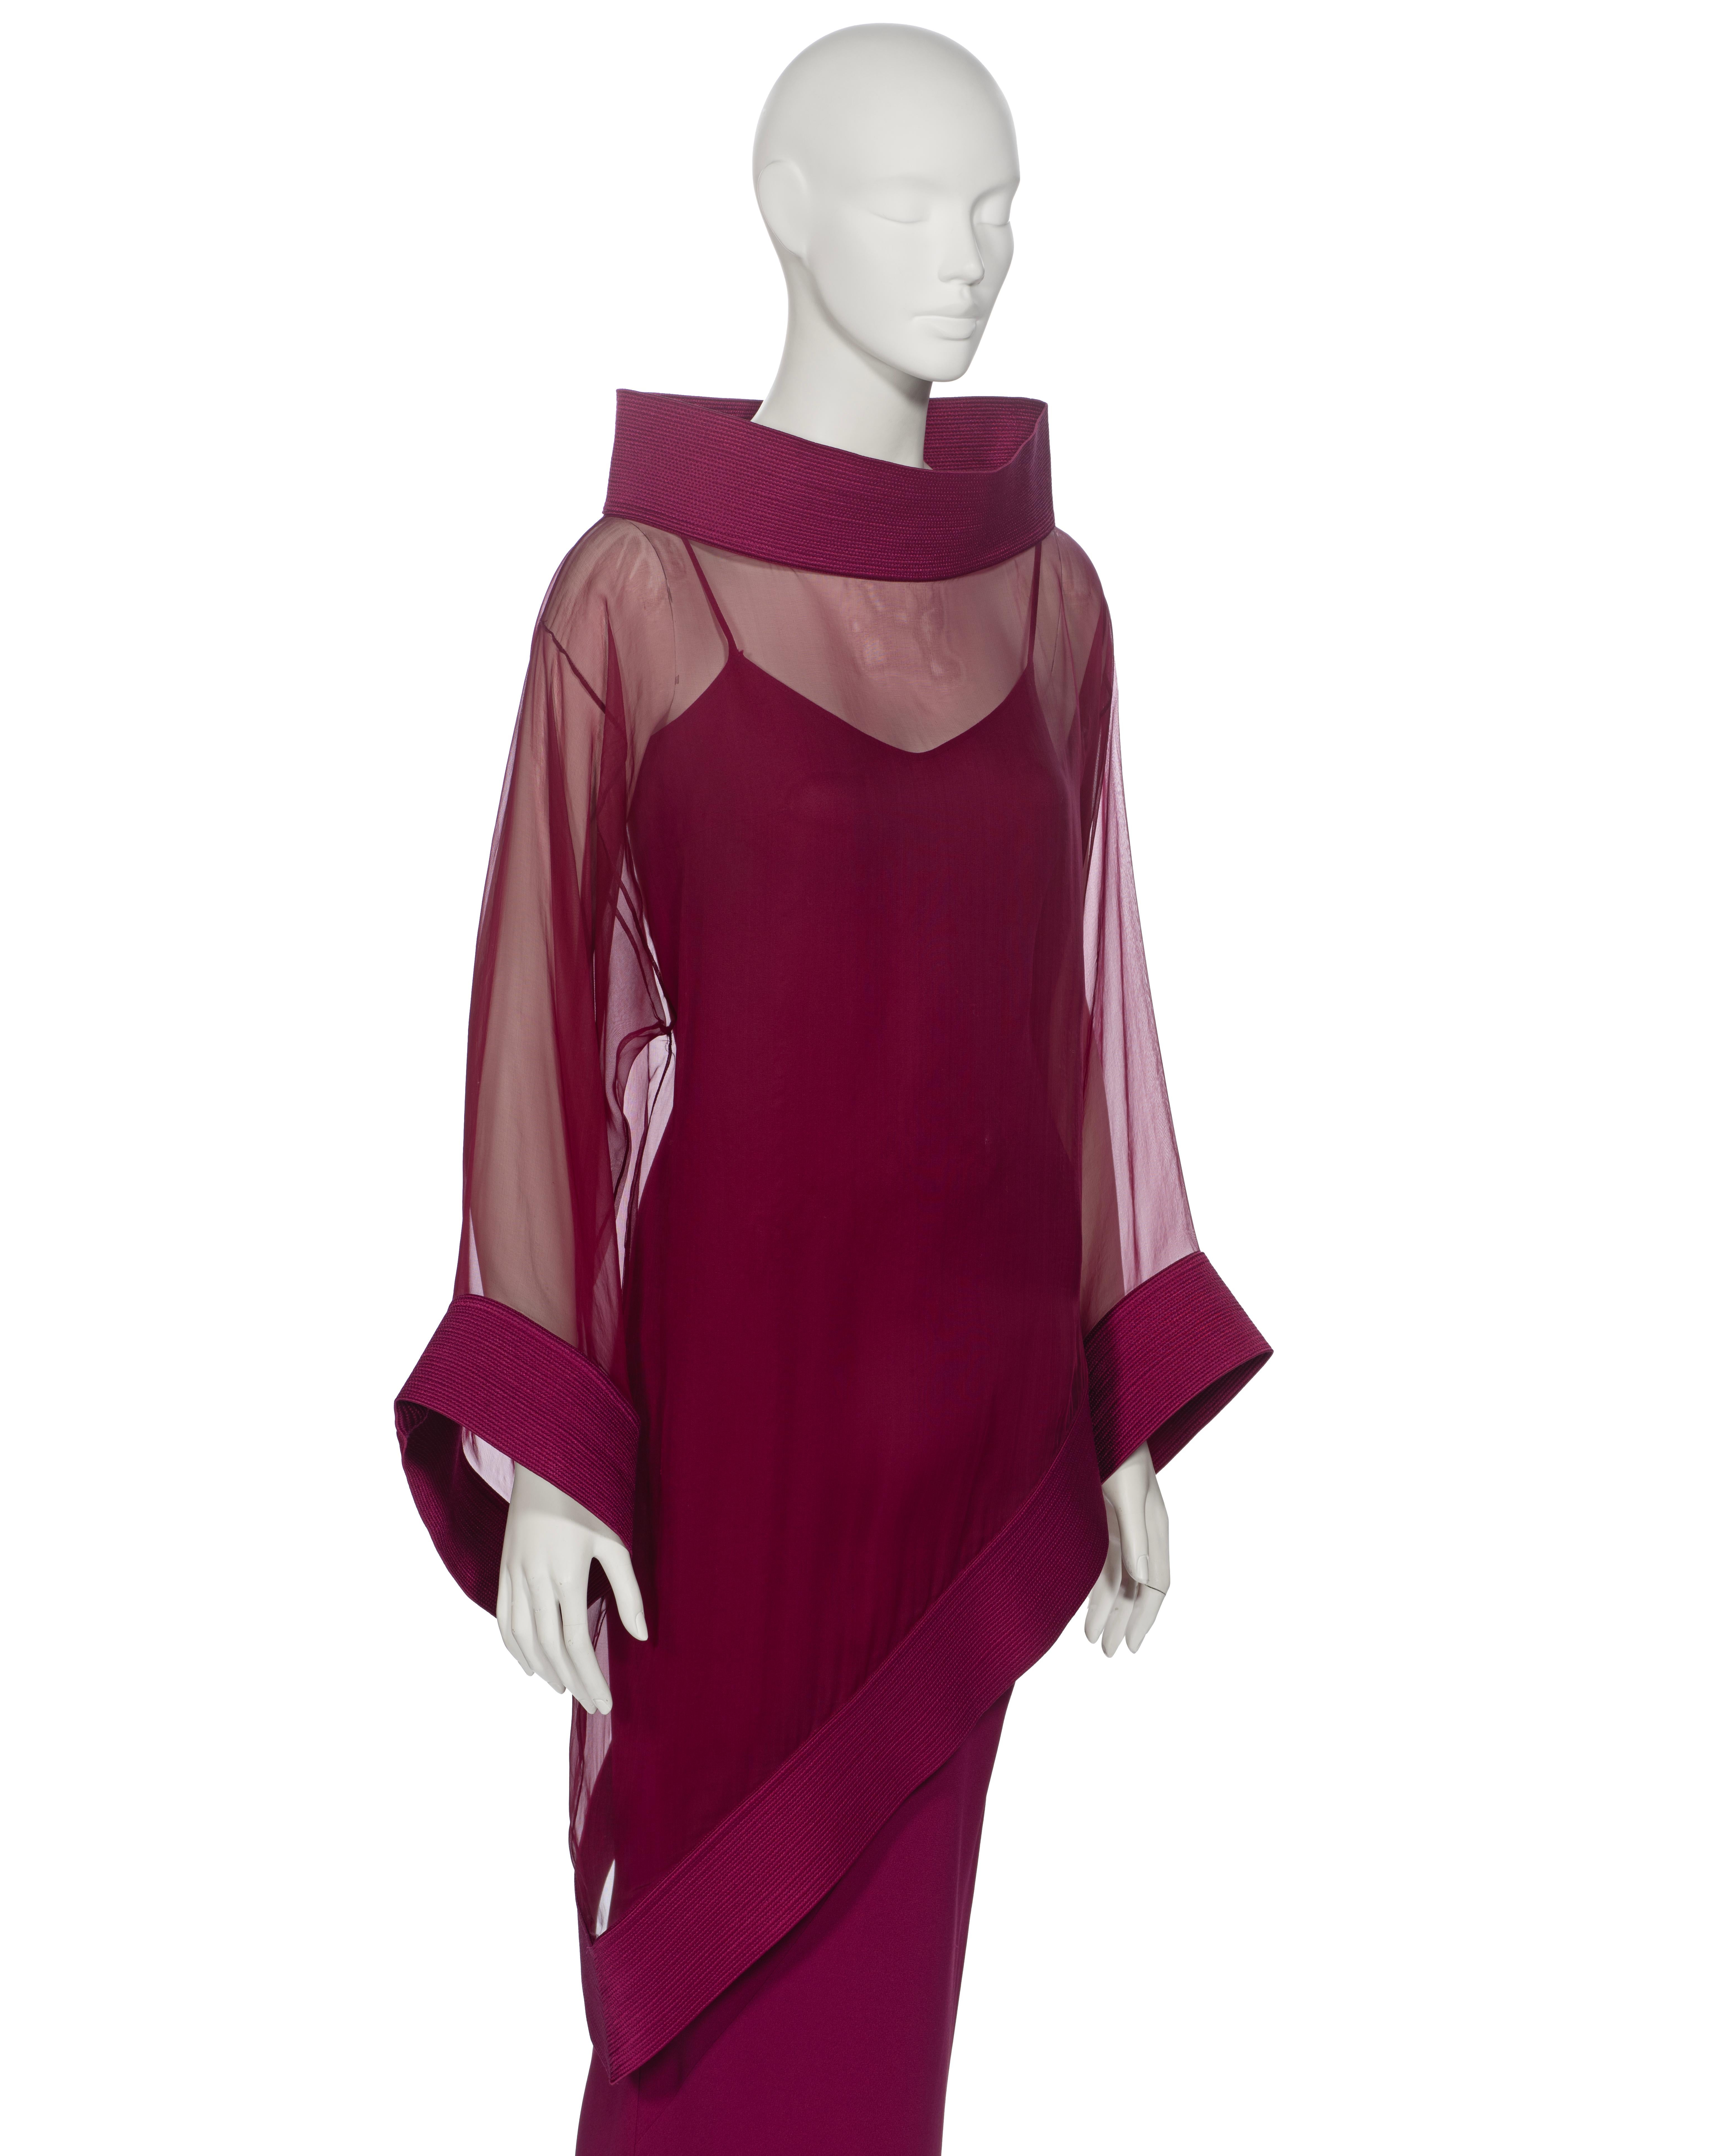 Christian Dior by John Galliano Claret Evening Dress and Tunic Ensemble, fw 1999 For Sale 1